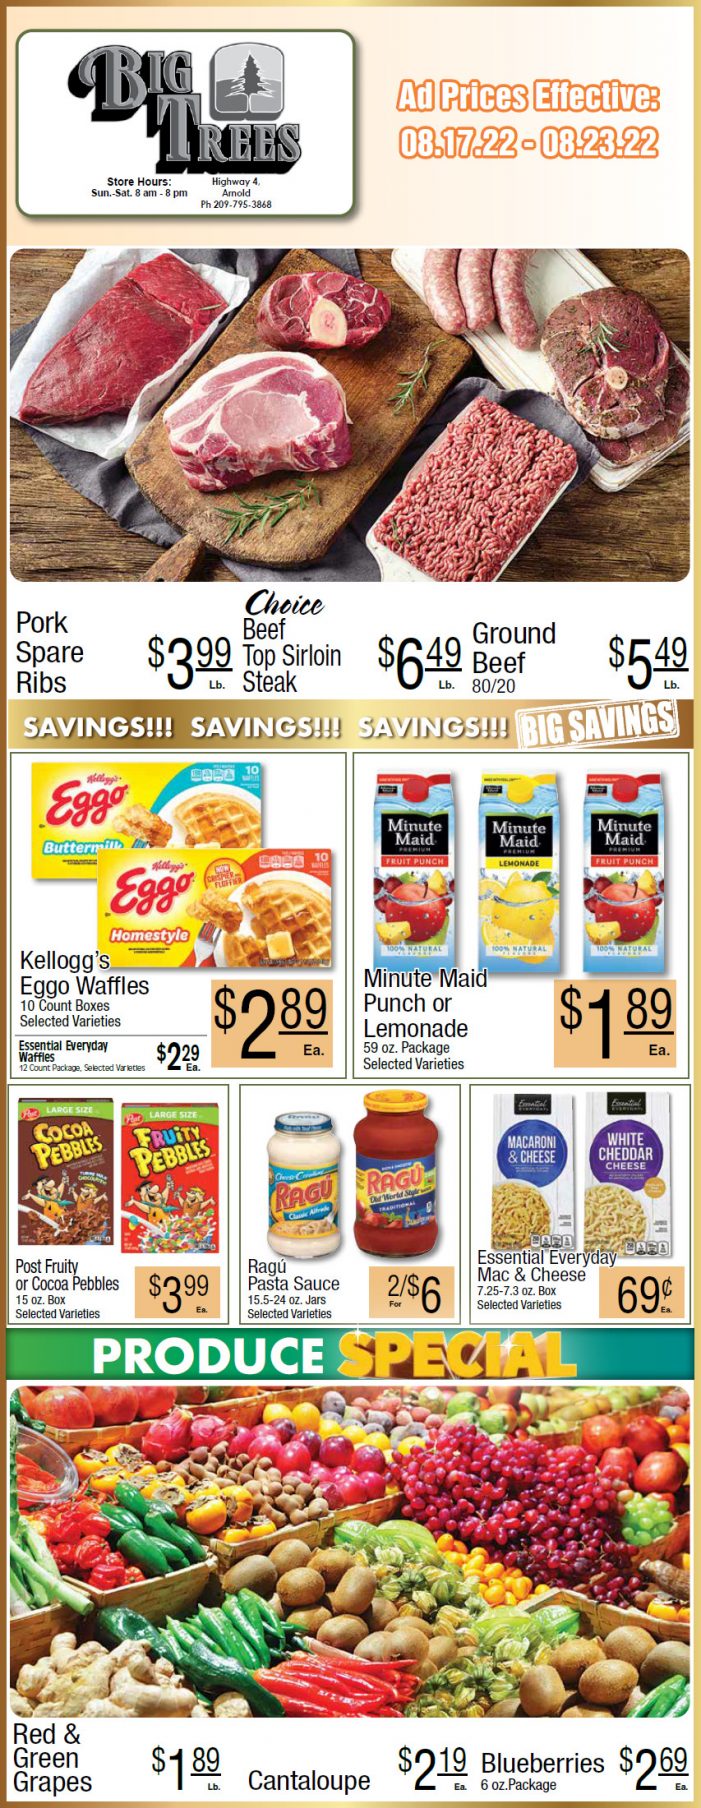 Big Trees Market Weekly Ad & Grocery Specials Through August 23rd!  Shop Local & Save for Summer!!